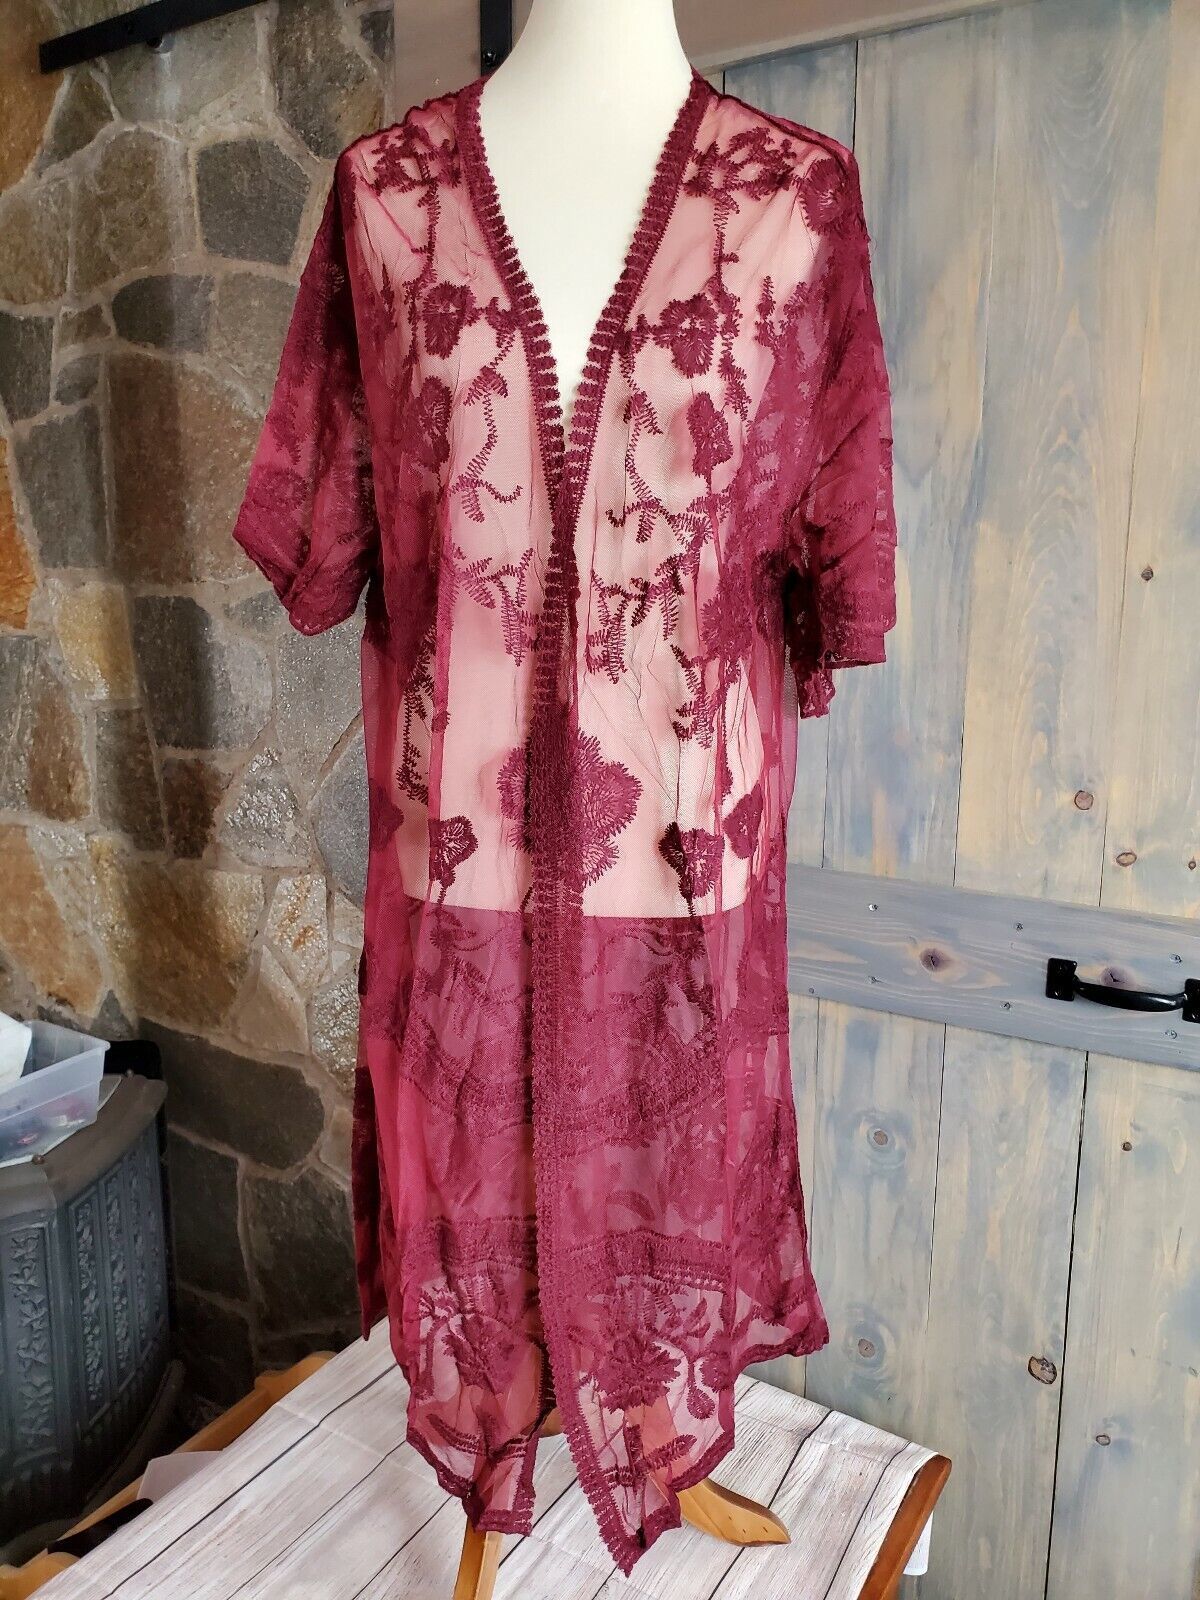 Primary image for rue21 Rue 21 Nightgown Maroon Lace Open Front Gown Robe Size XL